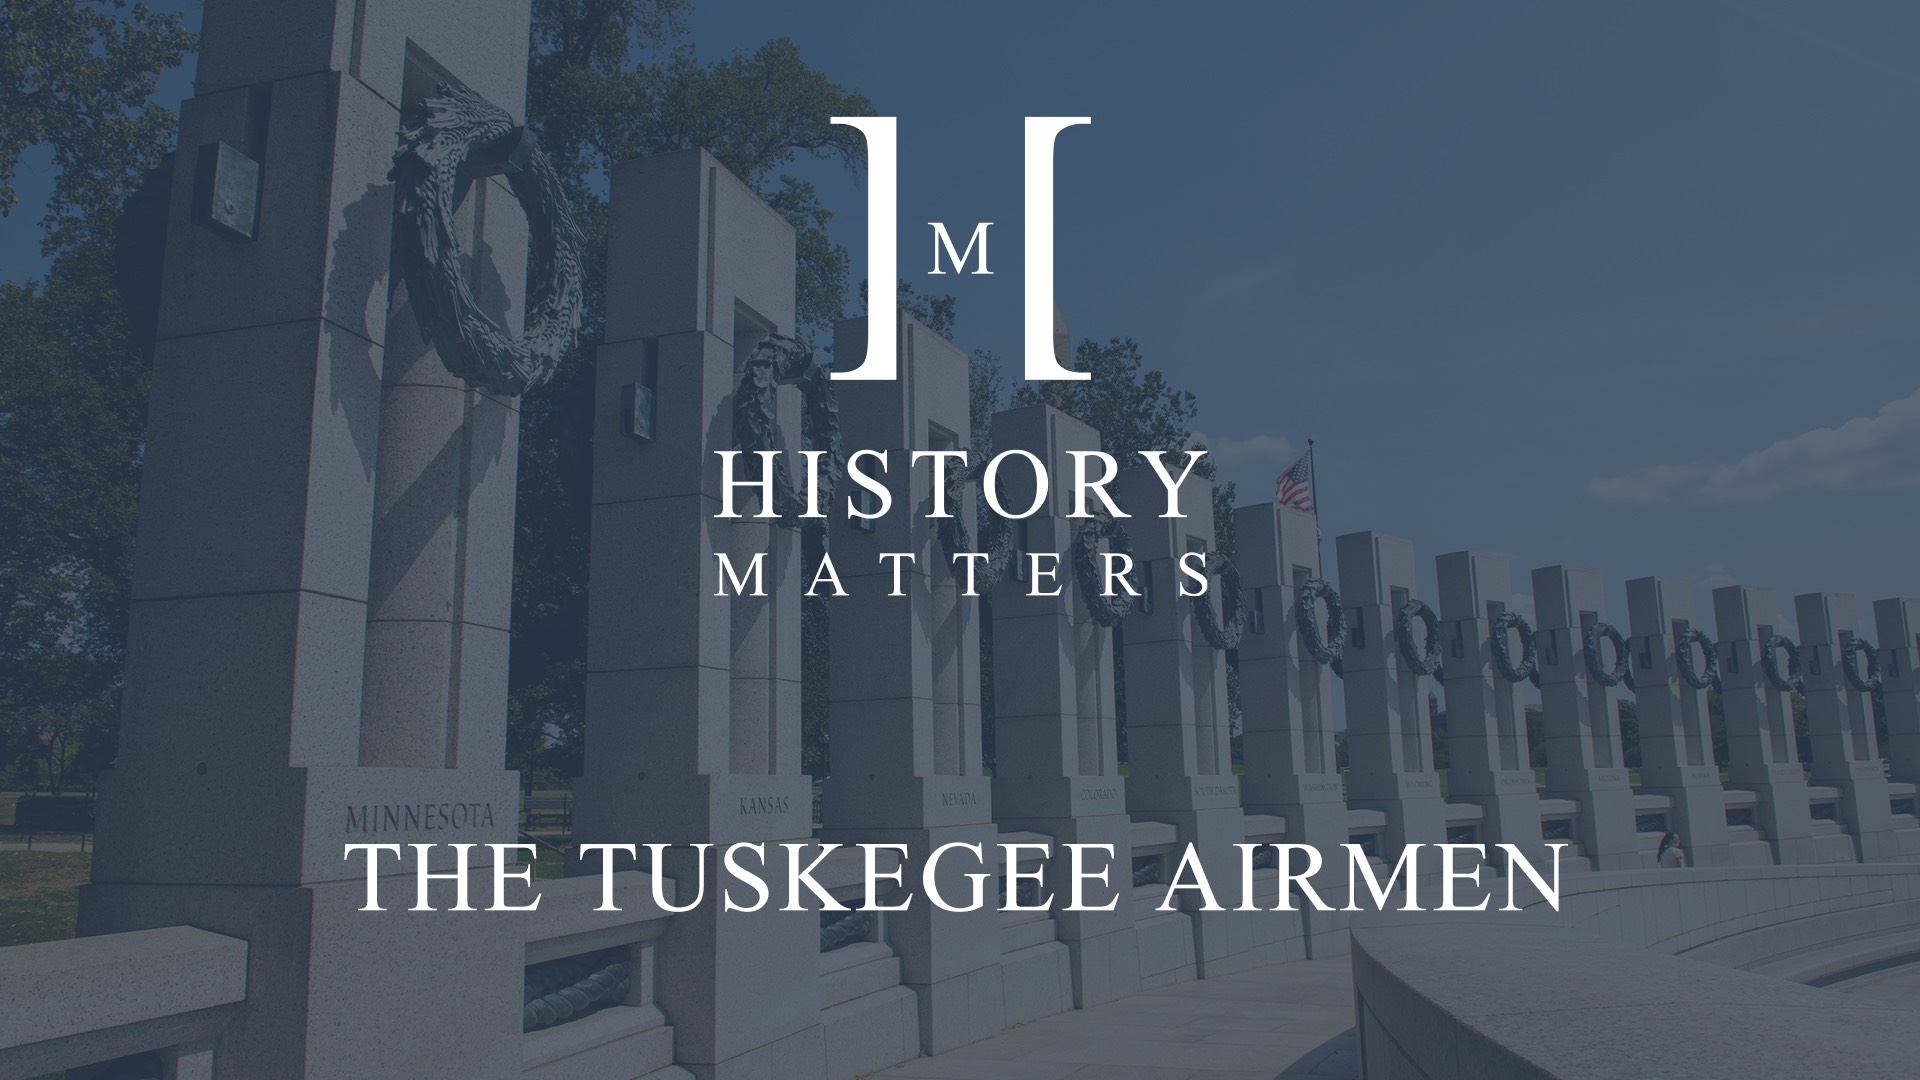 IU C&I Studios Page White HM The Tuskegee Airmen logo with dimmed background of war memorial in Washington DC